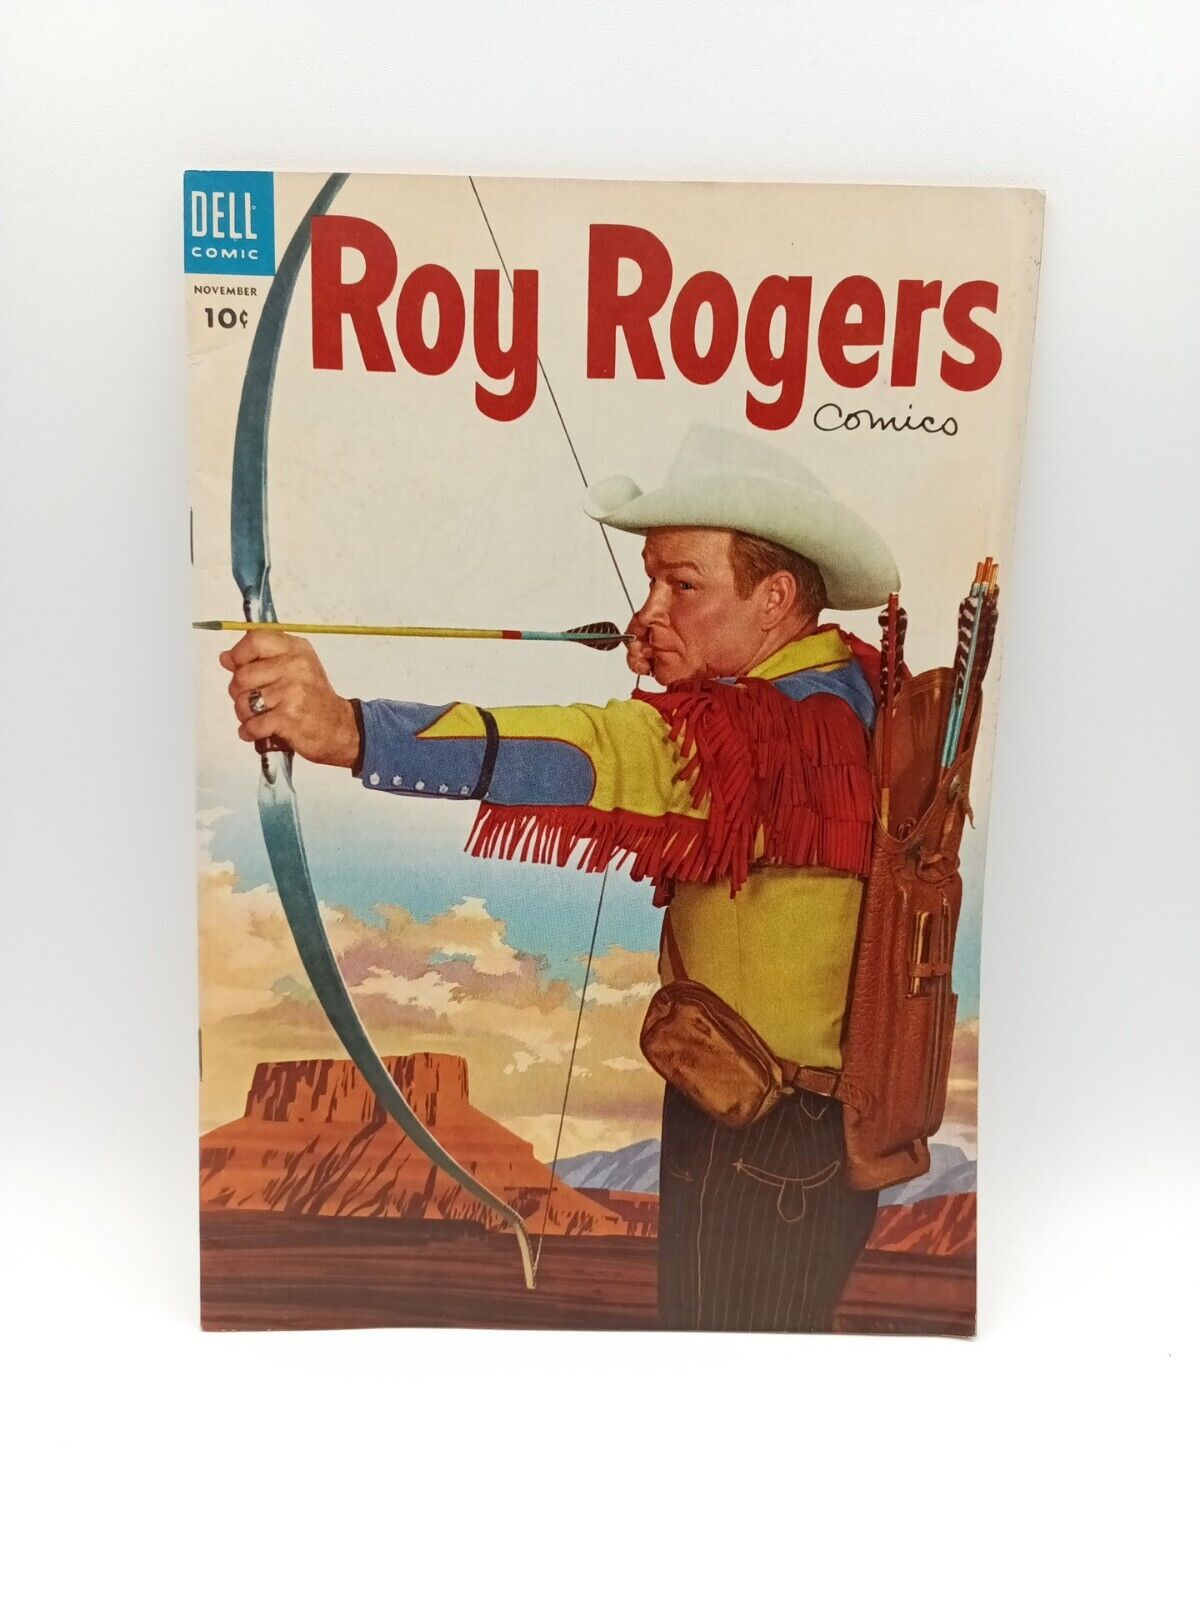 VINTAGE ROY ROGERS COMICS #83 DELL COMIC 1954 PRE OWNED READ 